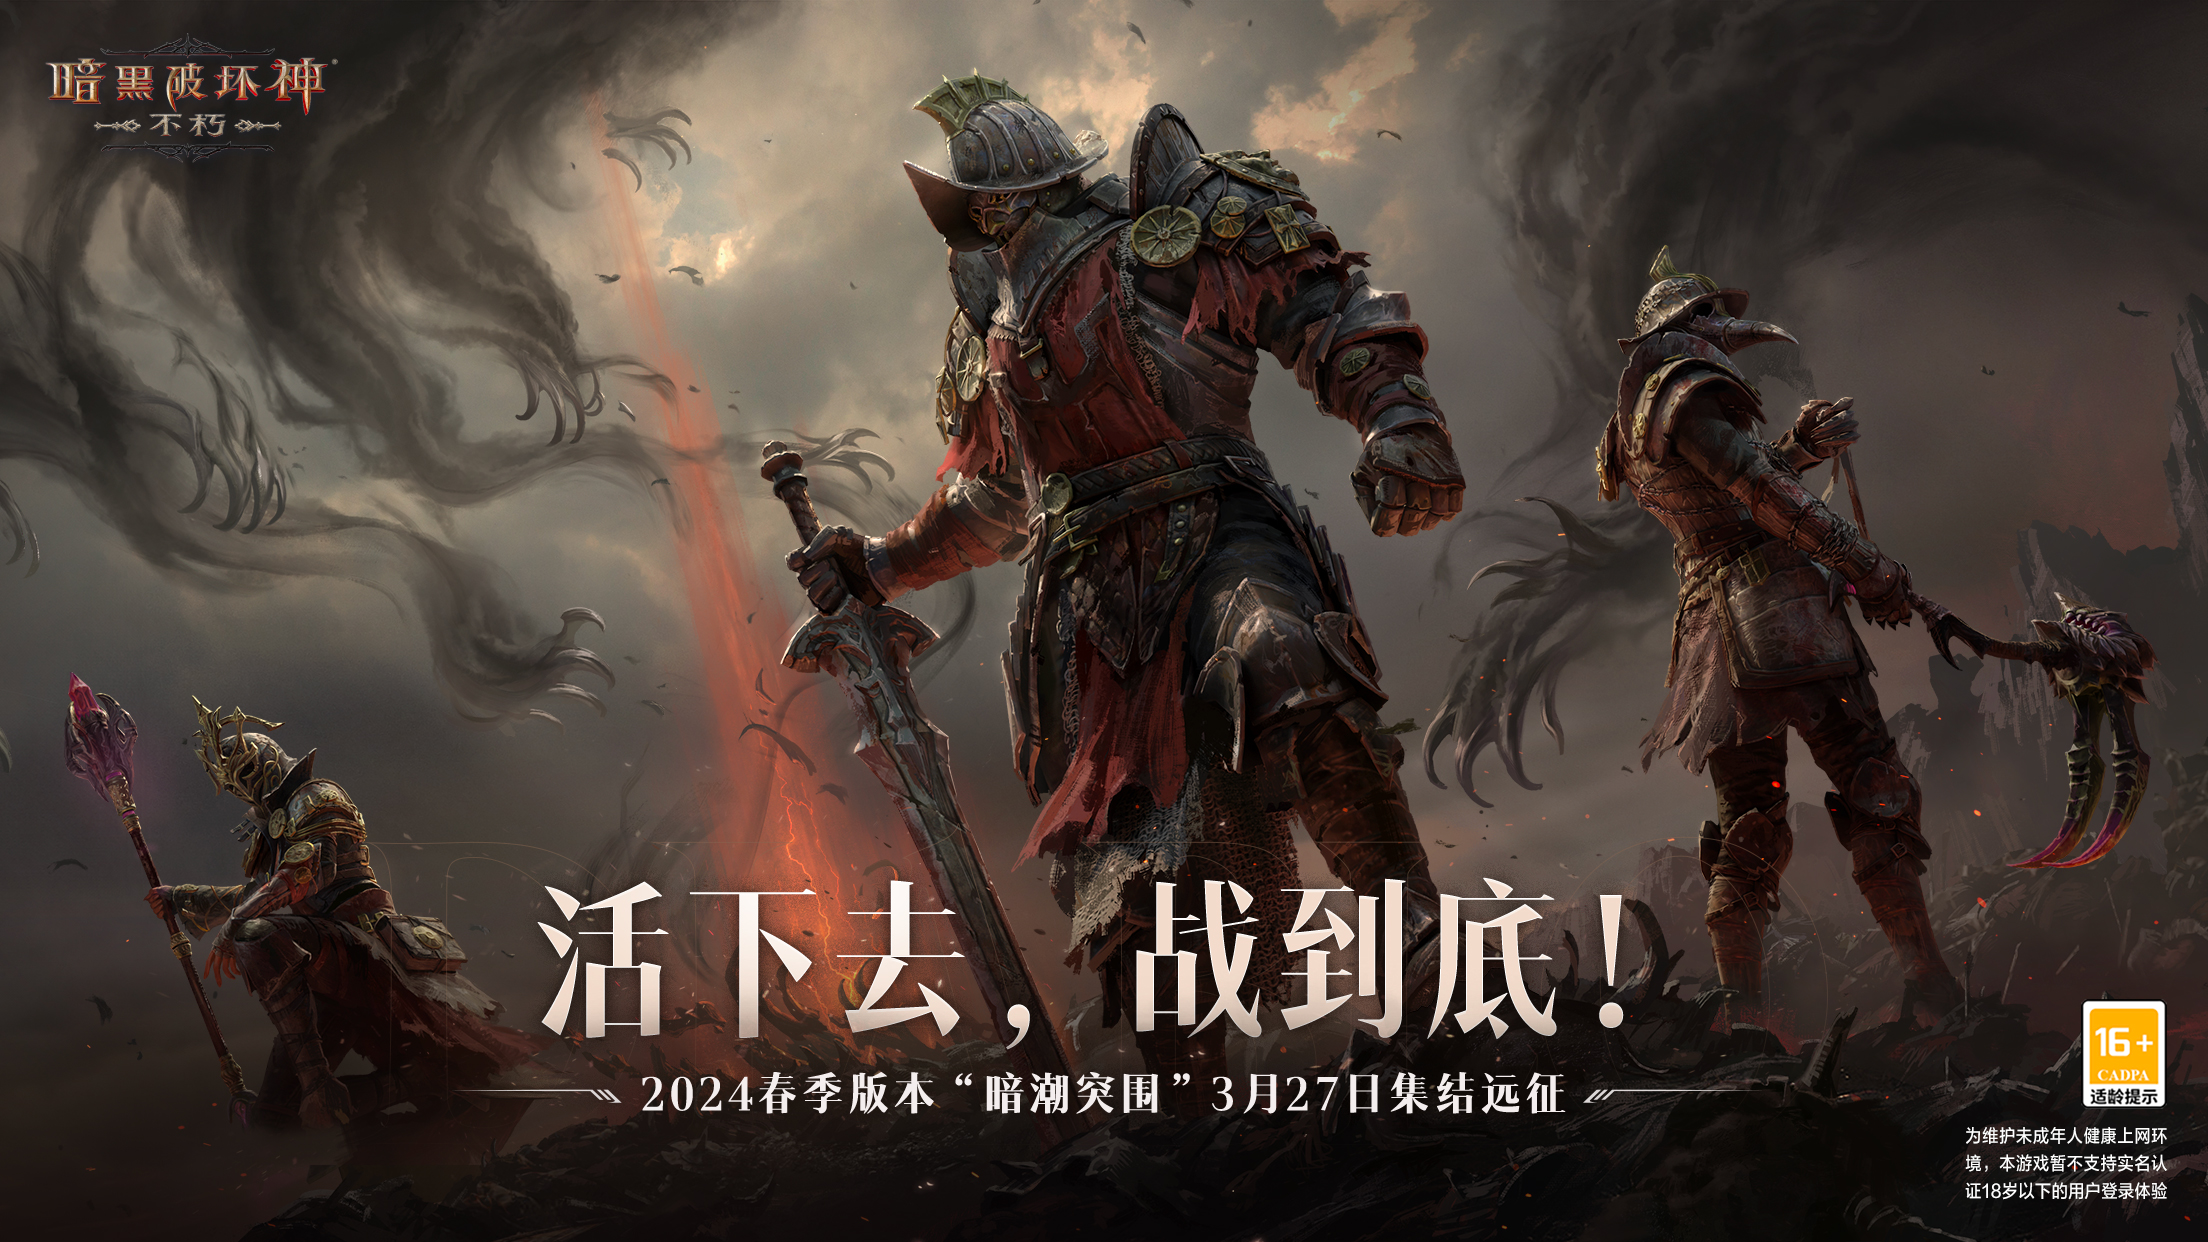 Pixelworks Brings New Mobile Gaming Experience to “Diablo® Immortal™”, a Co-developed Game by Blizzard Entertainment® and NetEase